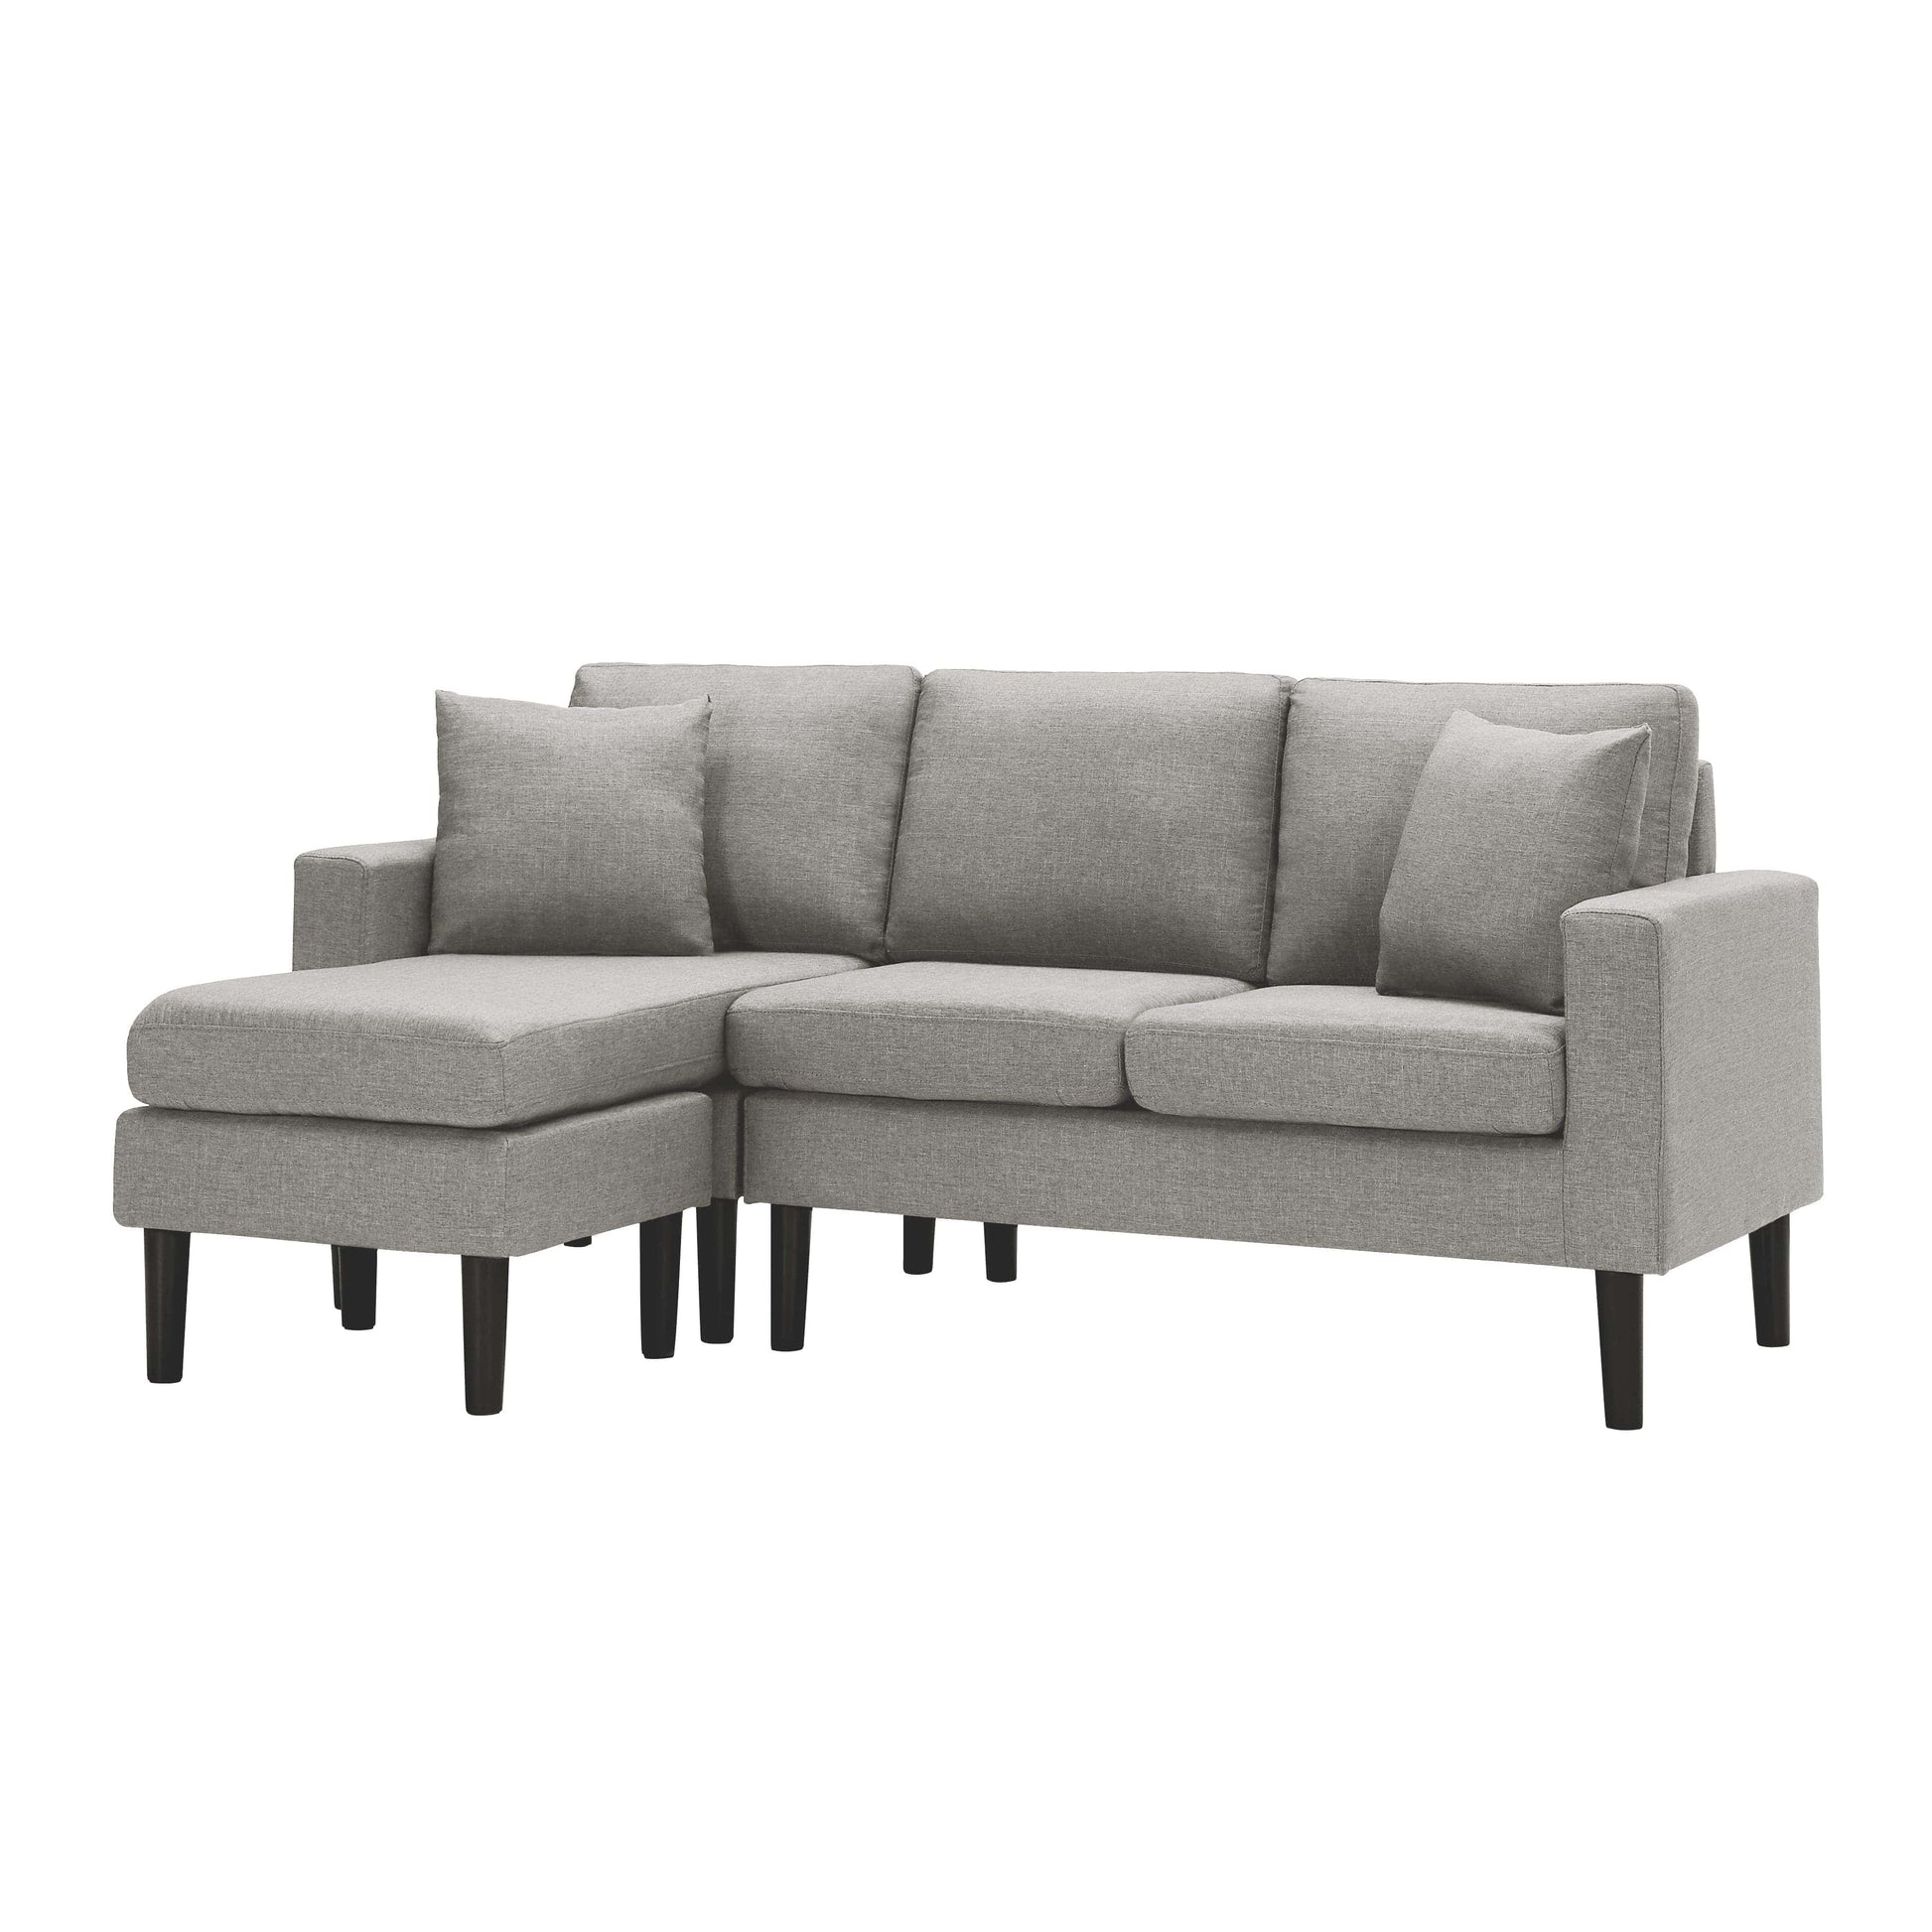 TFC&H Co. 72" Sectional Sofa Left Hand Facing w/ 2 Fabric Pillows- Ships from The US - sectional at TFC&H Co.